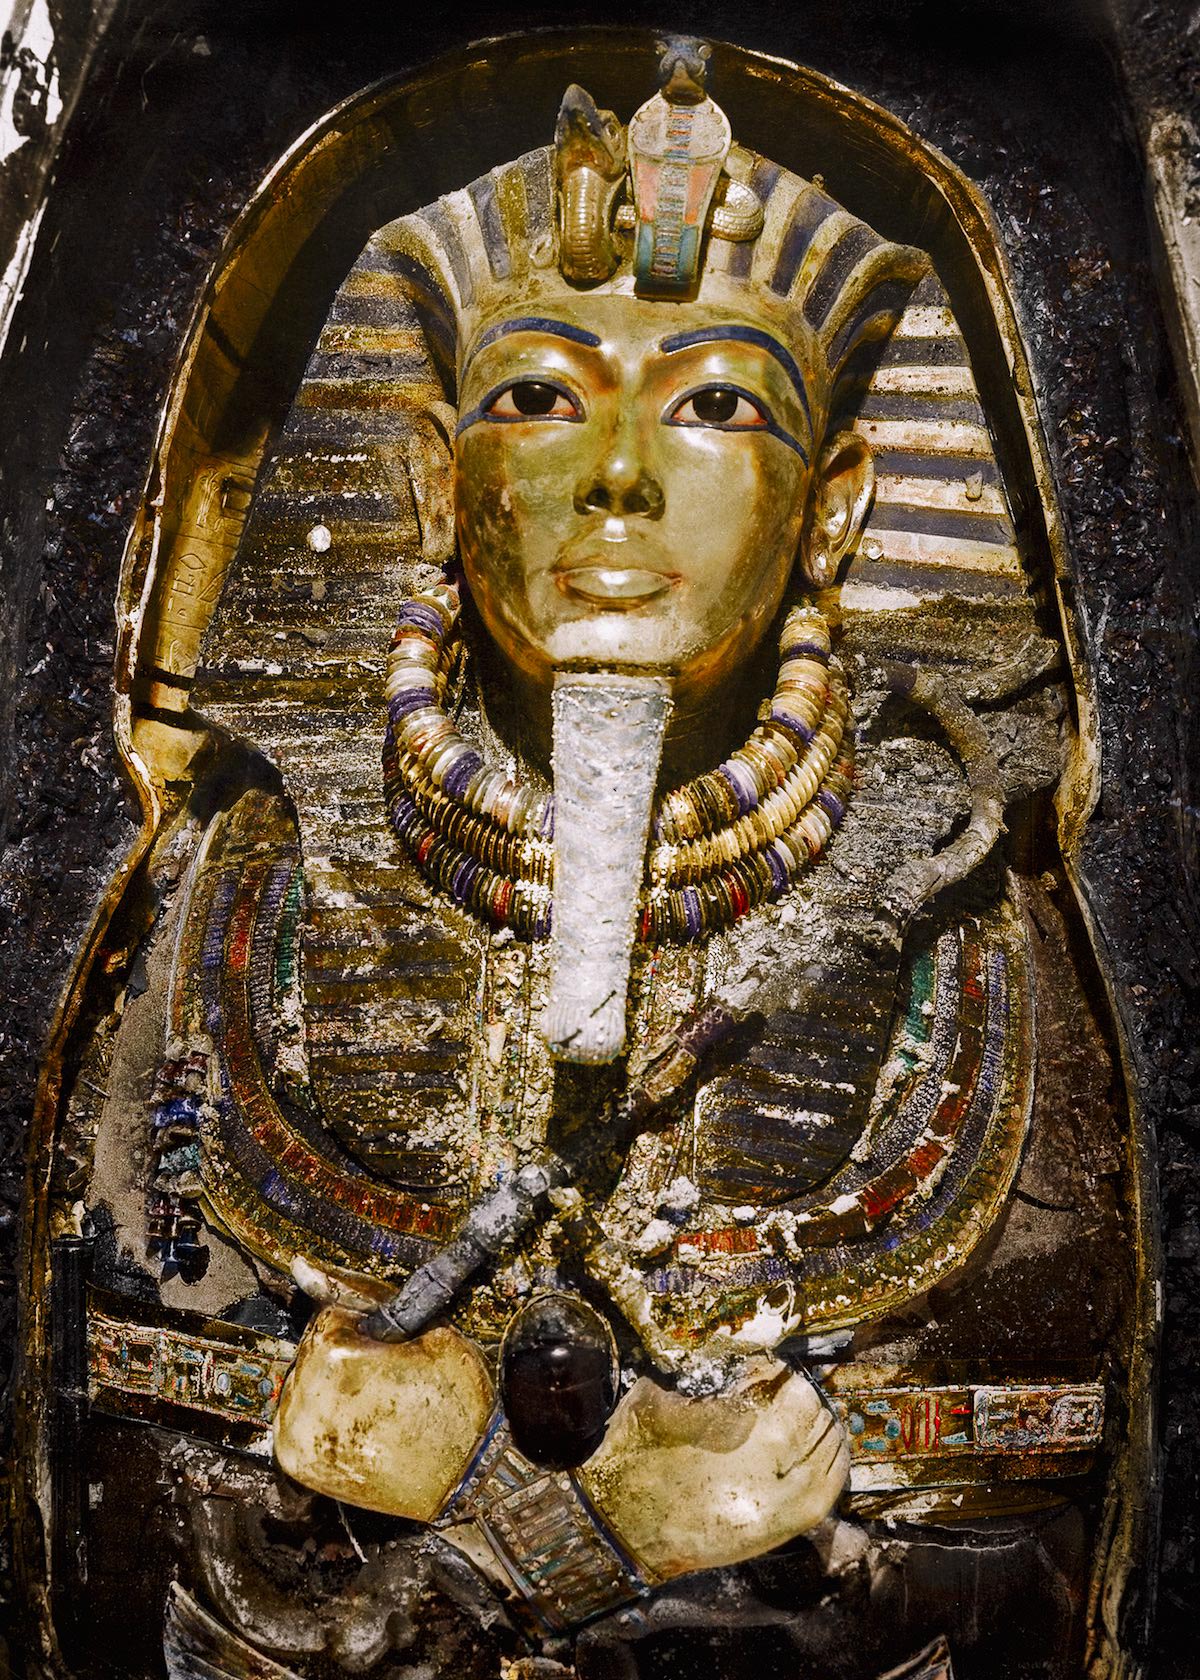 <p><strong>Tutankhamun’s Tomb, innermost coffin</strong></p><p>Egyptian New Kingdom</p><p>Egypt</p><p>1323 BCE</p><p>Gold with inlay of enamel and semiprecious stones</p>